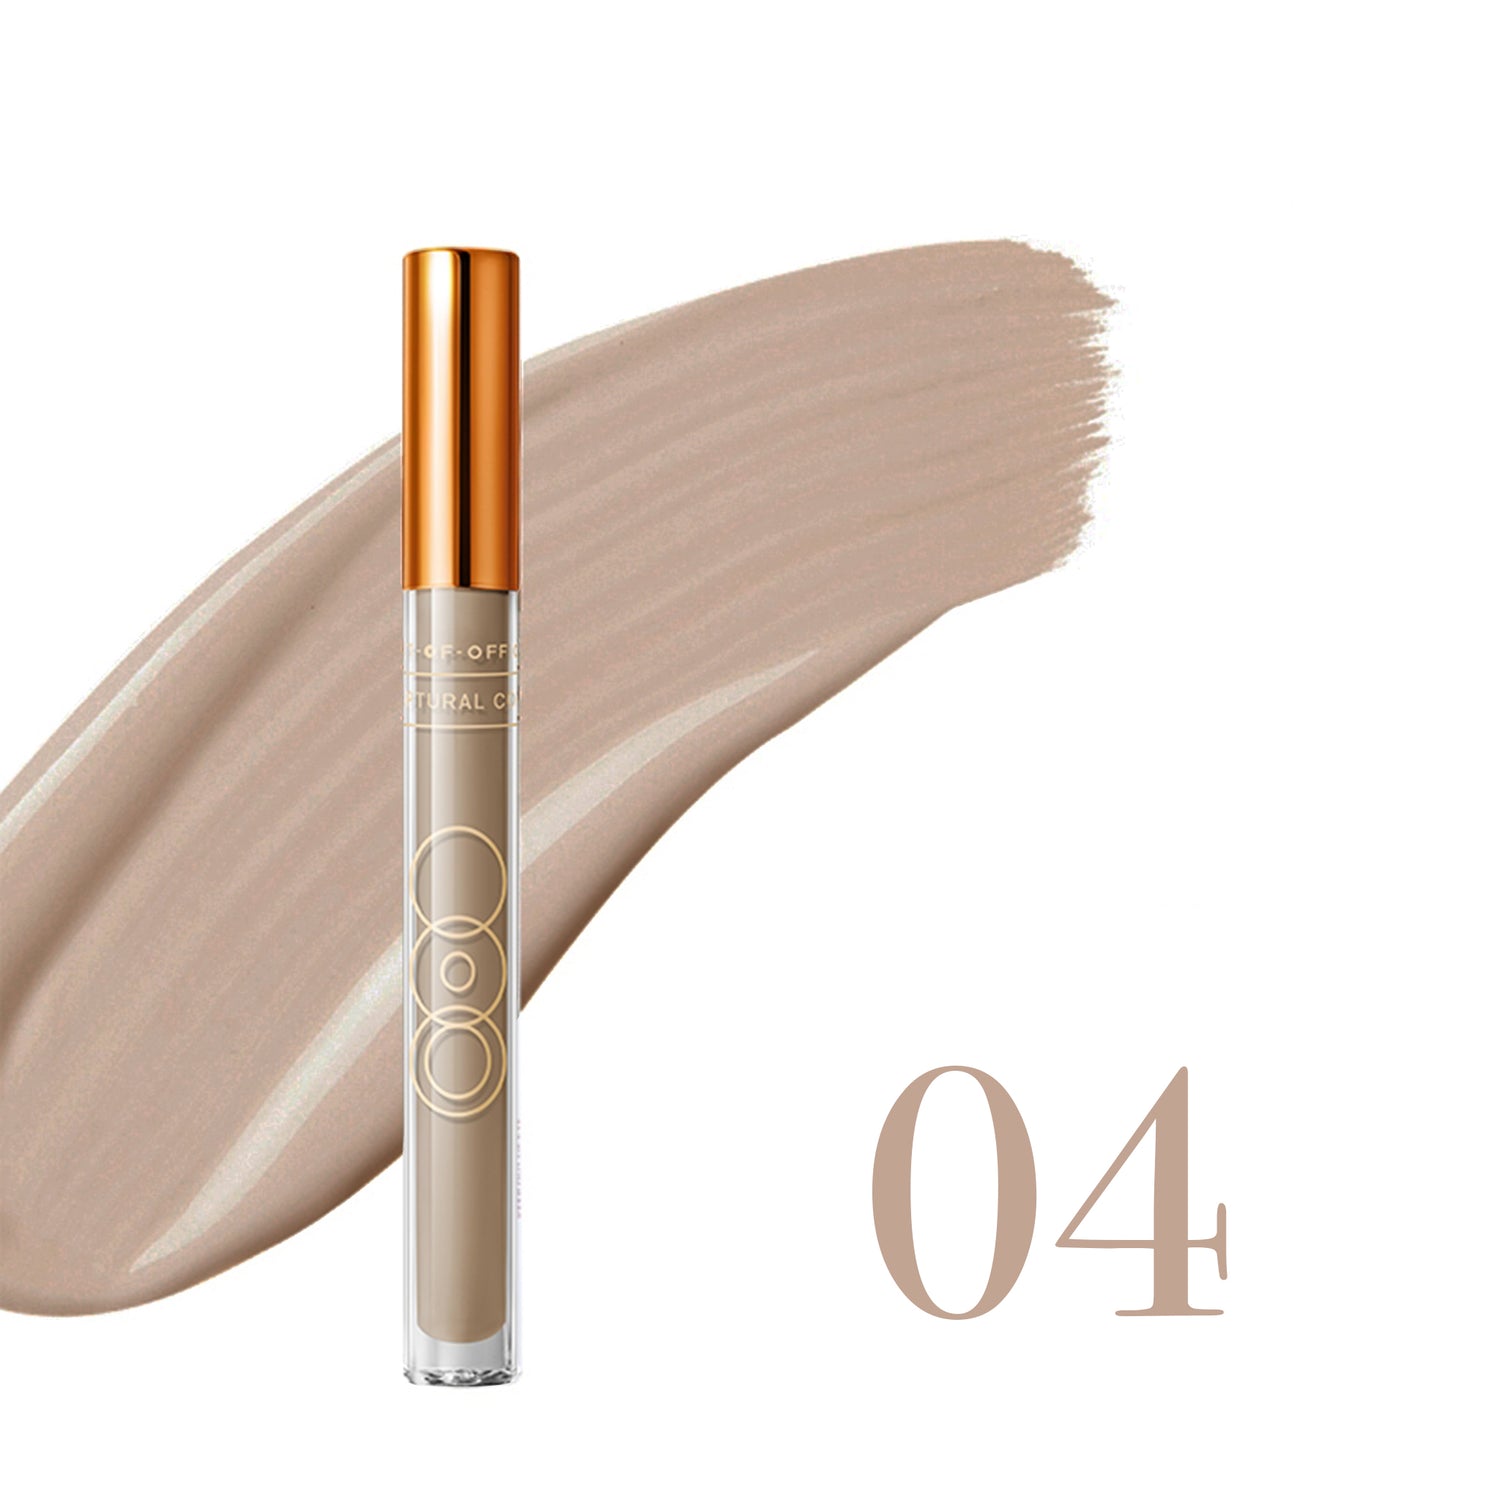 OUT OF OFFICE OOO Highlight And Contour Combo 2pcs